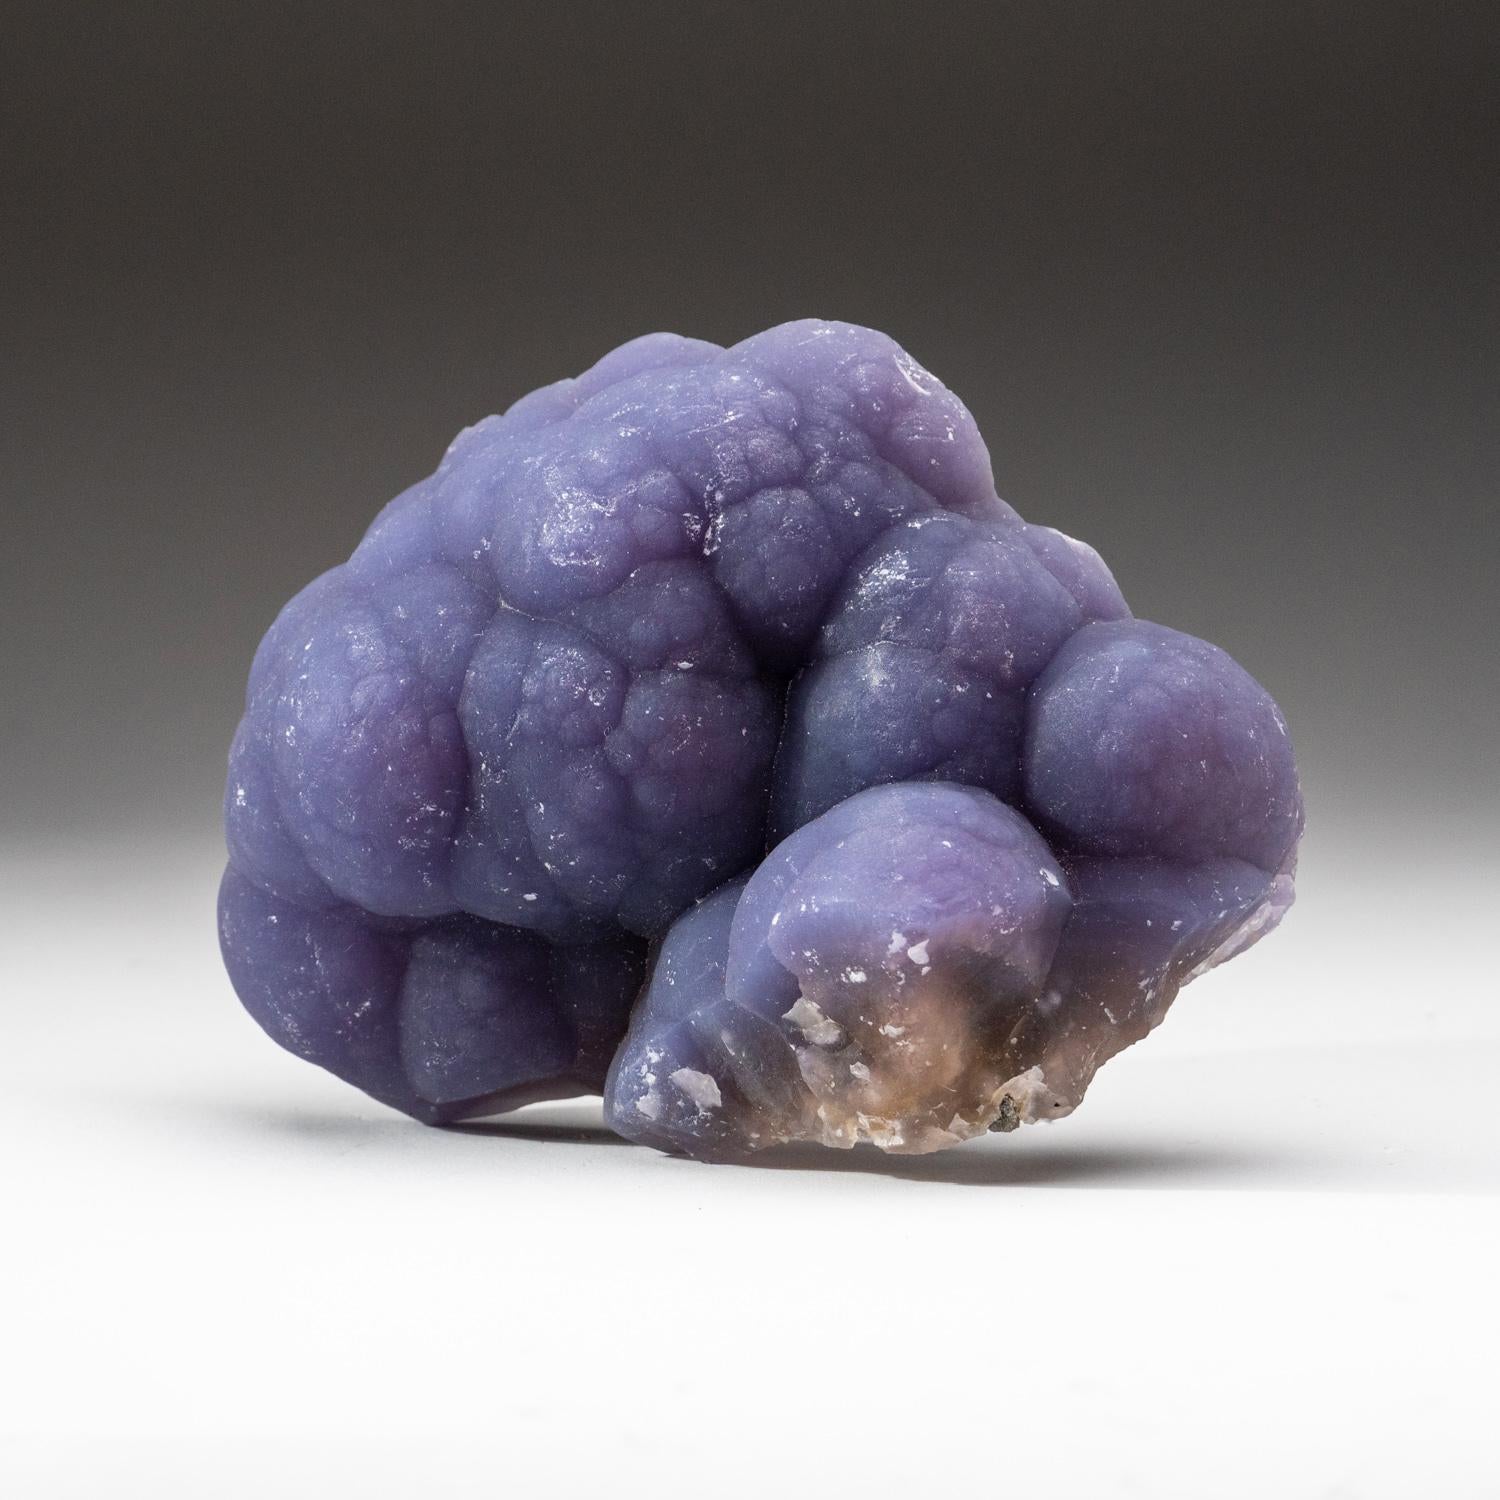 From Minggang Mine, Xinyang Prefecture, Henan, China Translucent purple fluorite in botryoidal formation with sculptural hemispherical aggregates covering both sides of its matrix. The organic formations of this mineral, combined with its unique